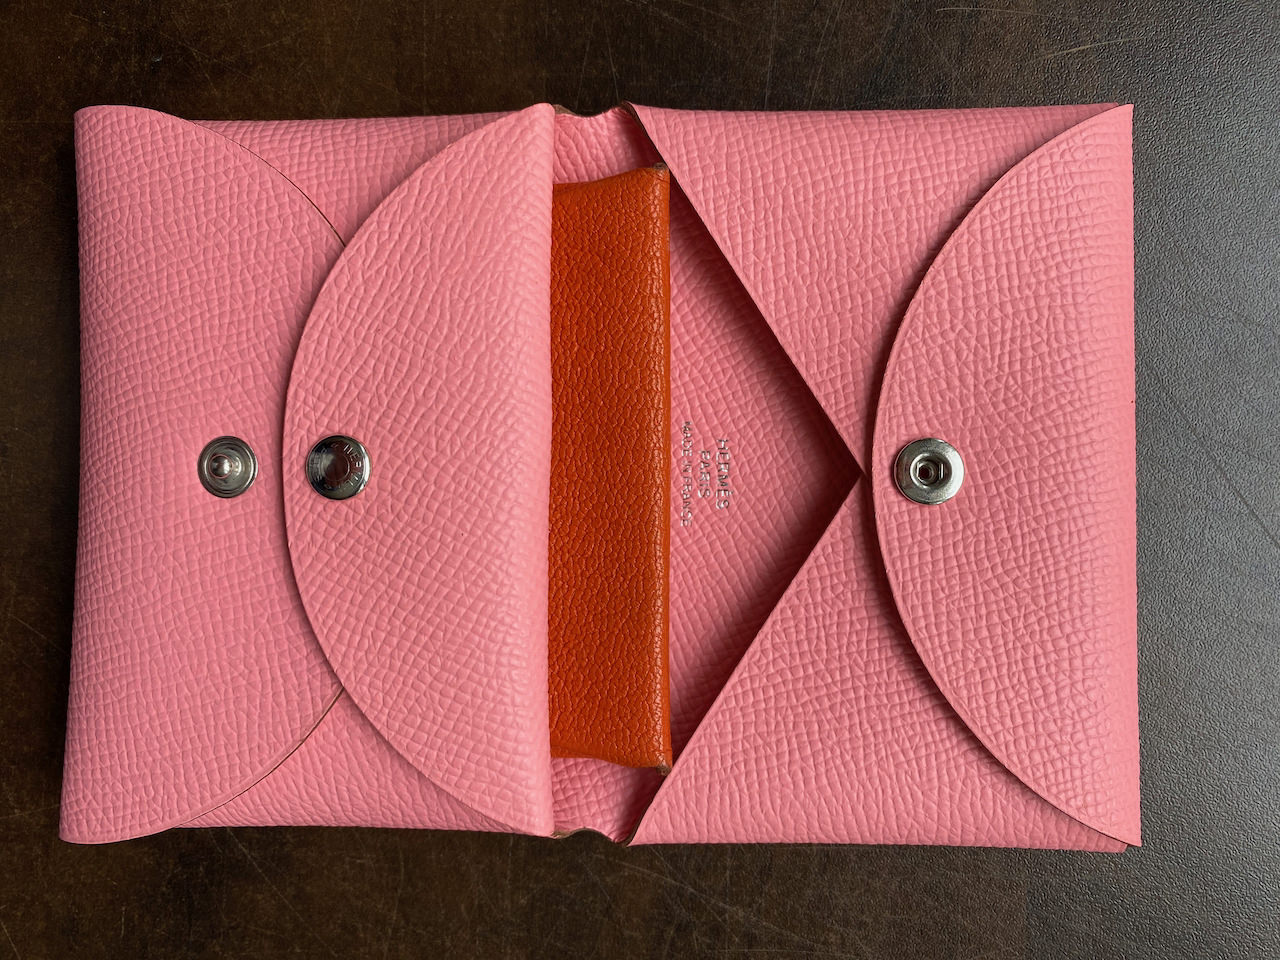 Hermes Calvi Cardholder Review - Pros, Cons, and Is It Worth It